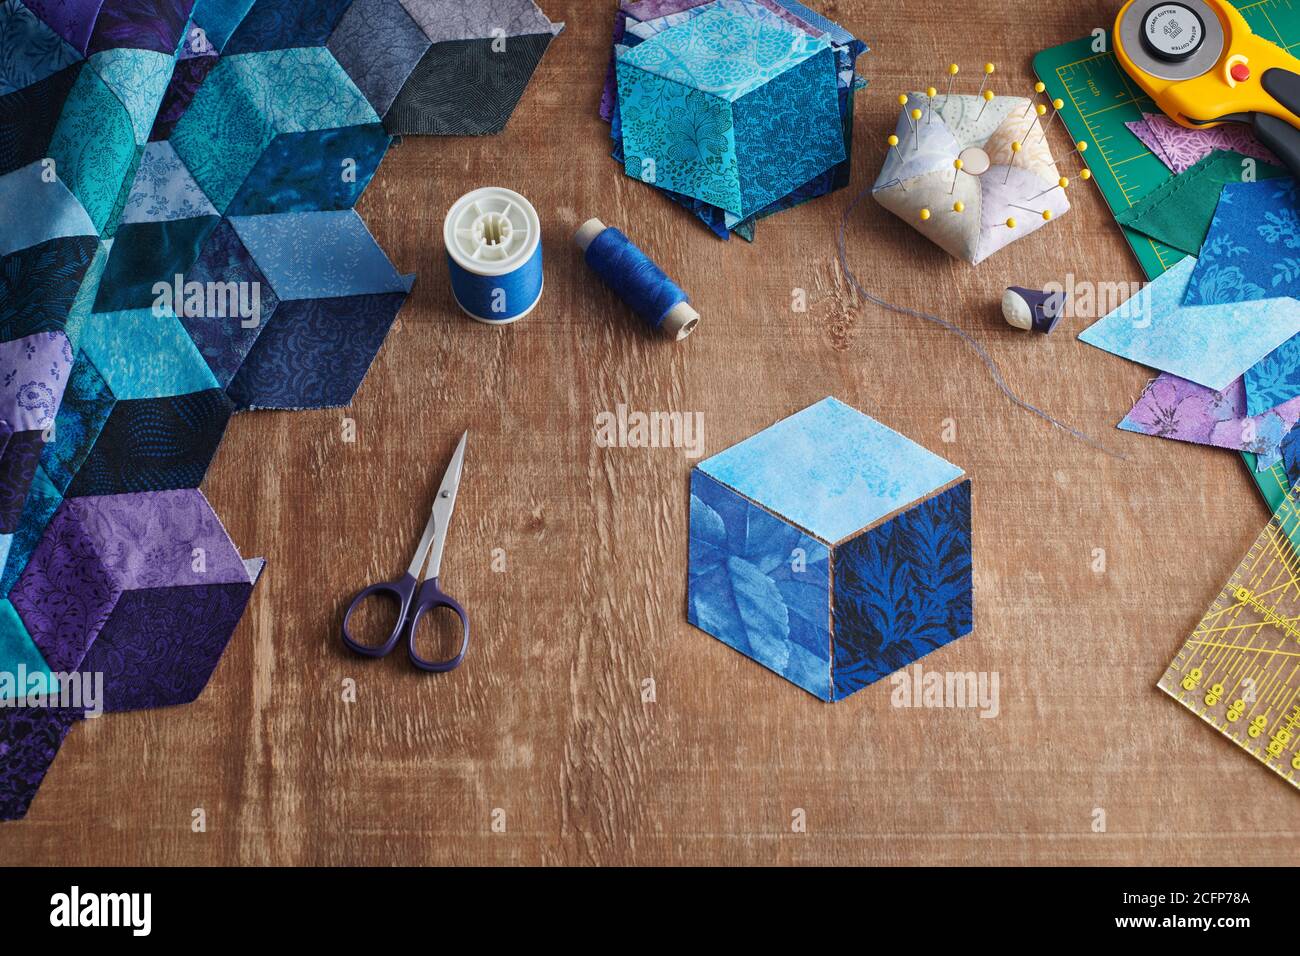 Fragment of tumbling blocks quilt, accessories for quilting on a wooden surface. Stock Photo